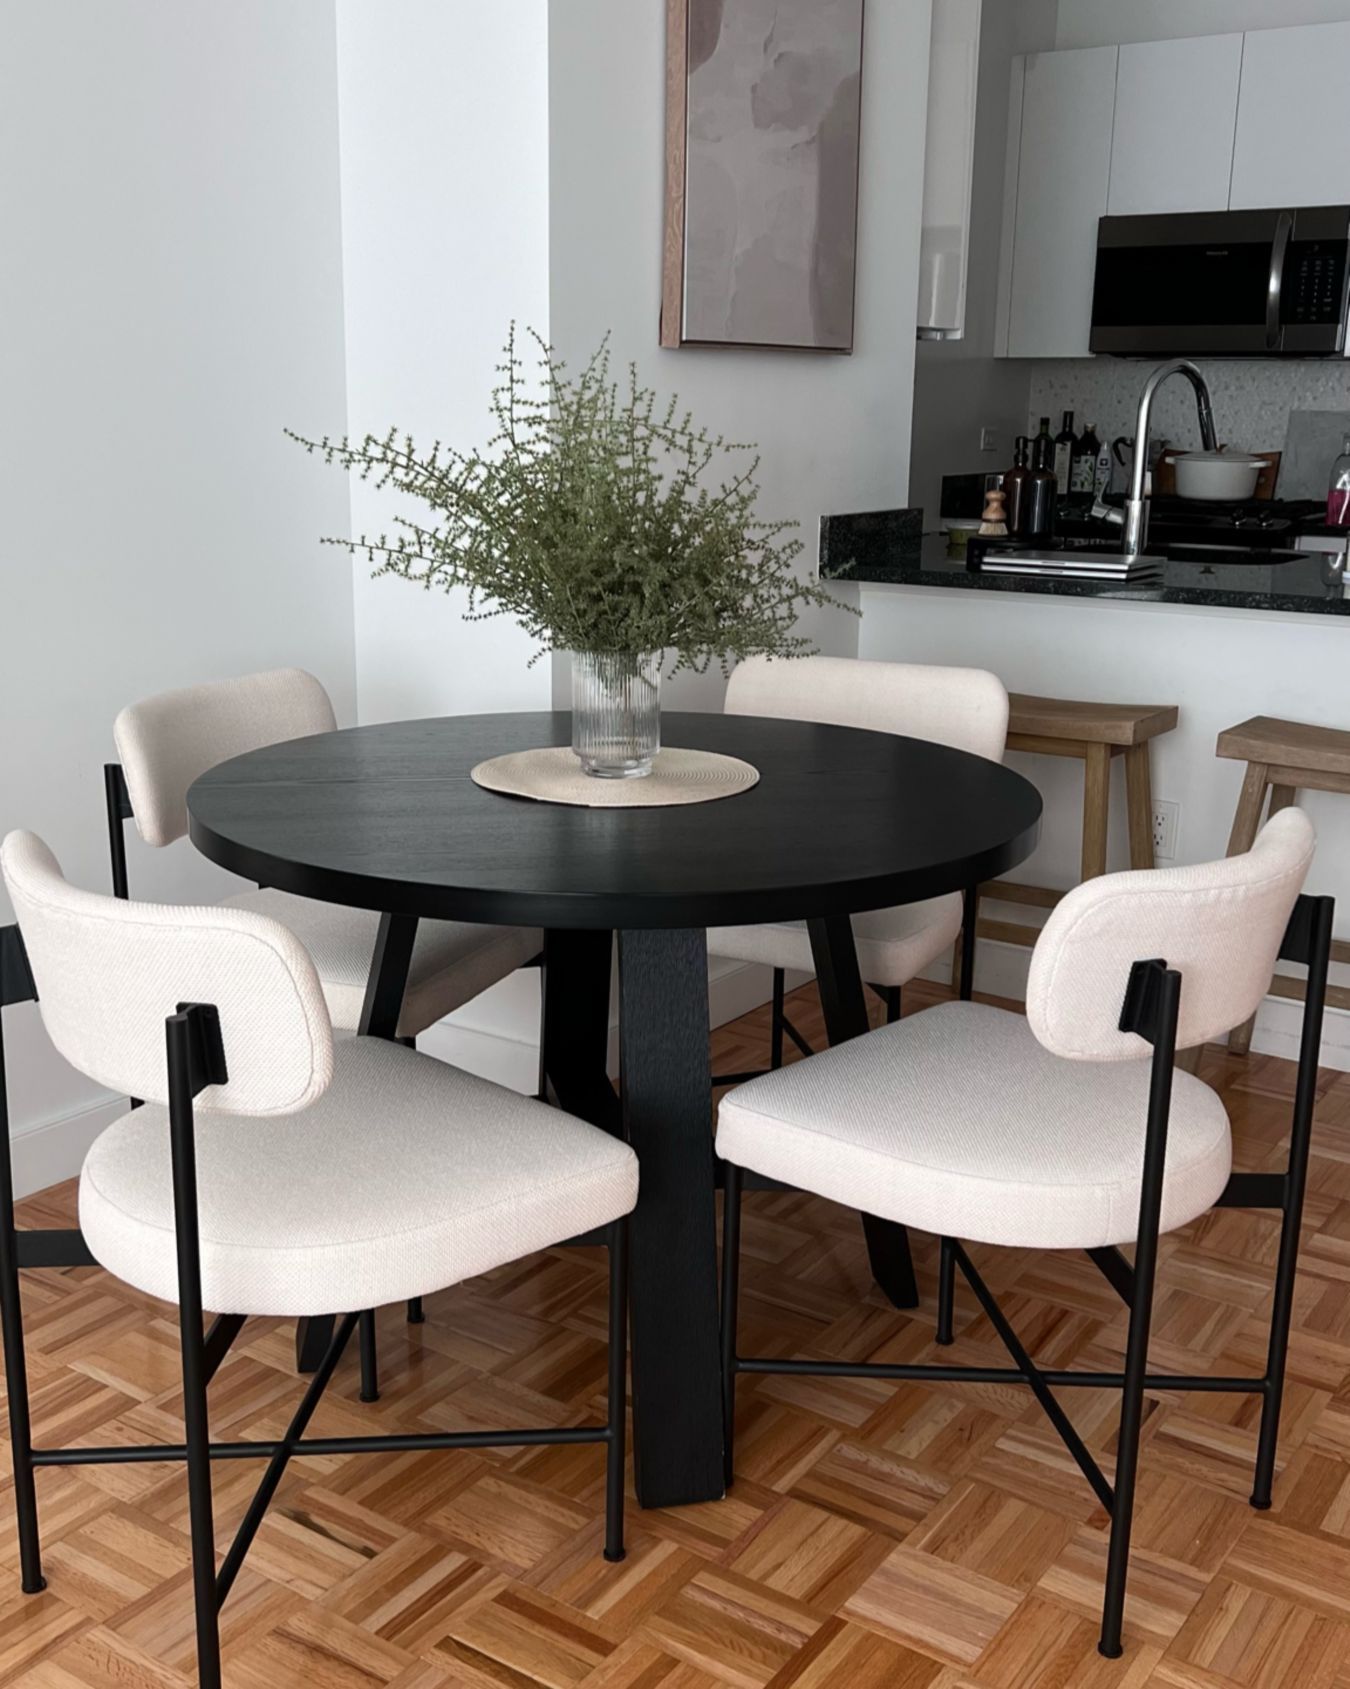 Dining in Style: The Timeless Elegance of
a Black Dining Table